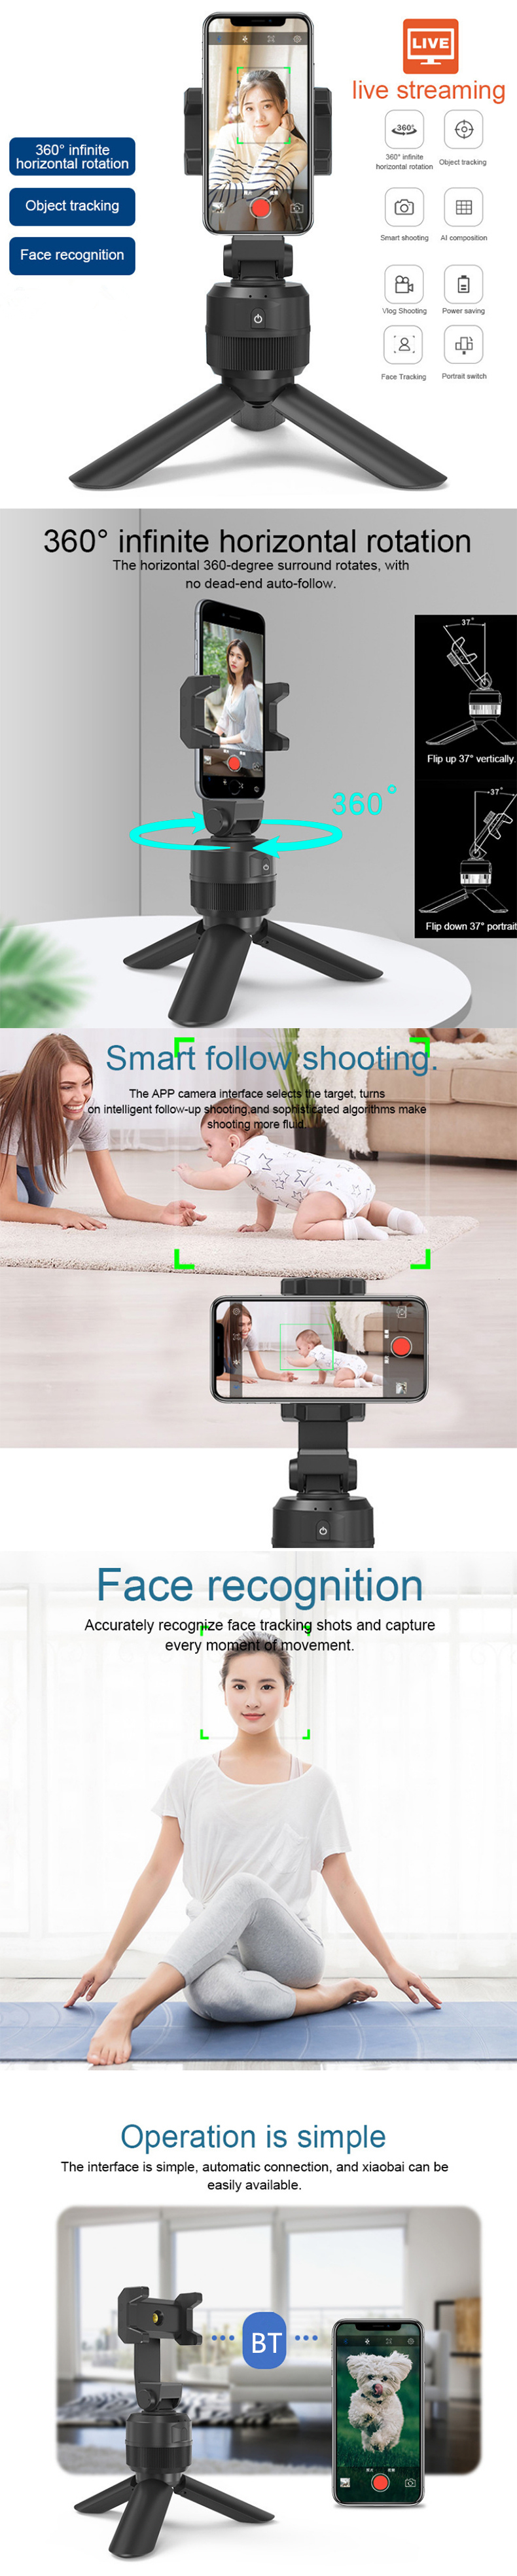 Bakeey-360deg-Intelligent-Auto-Face-Tracking-Mobile-Phone-Stand-Gimbal-Stabilizer-Tripod-for-Selfie--1824698-1